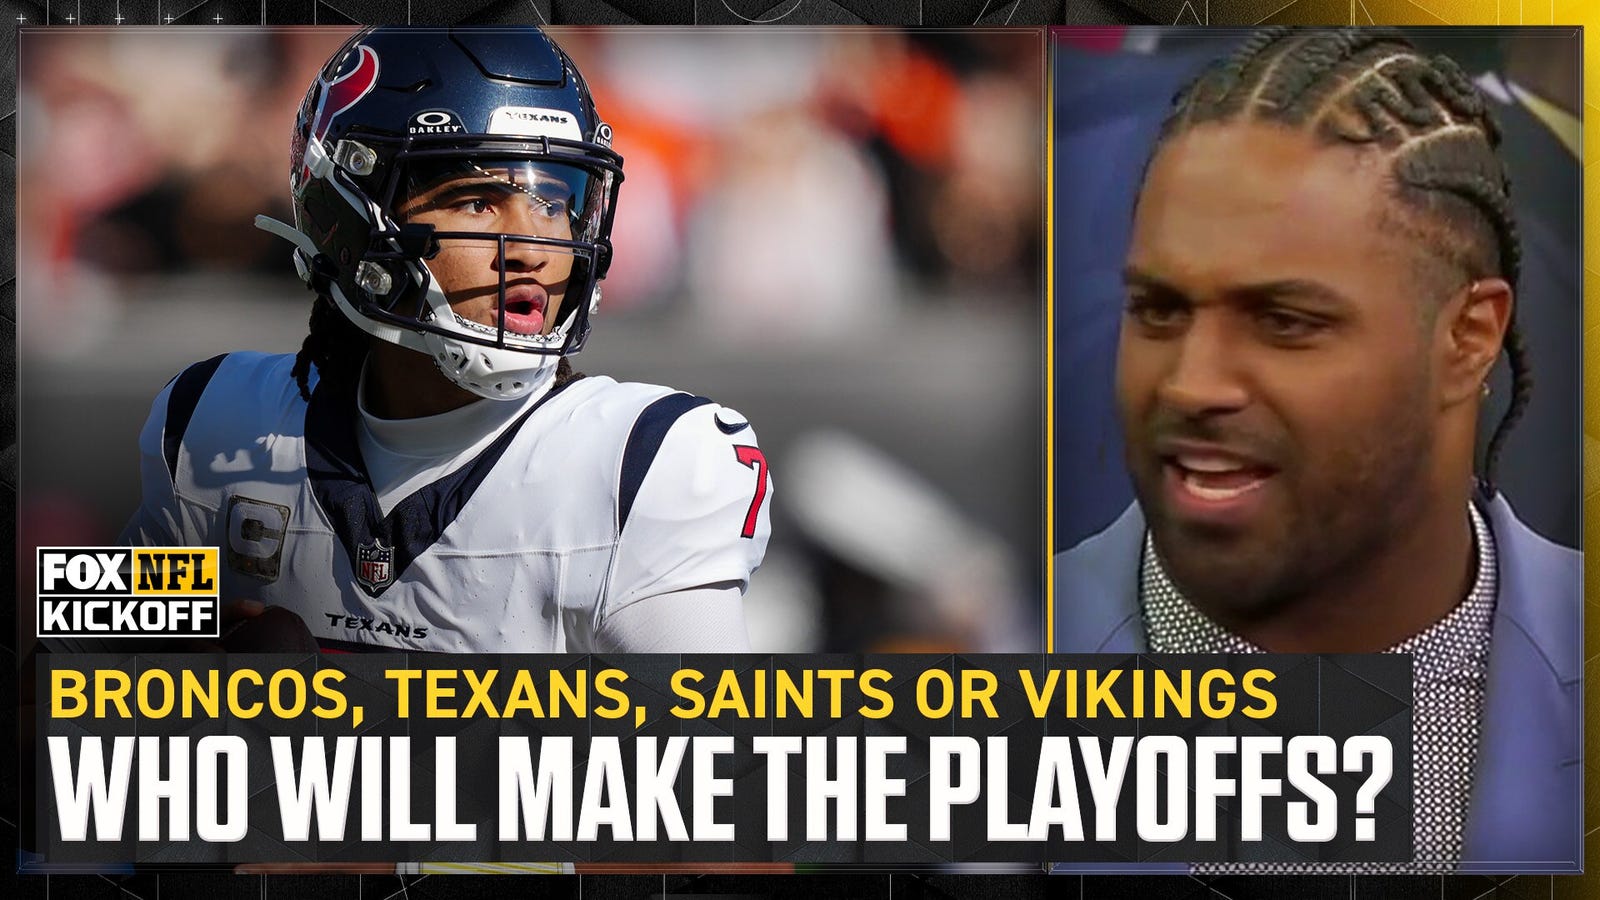 Who will make the playoffs: Vikings, Broncos, Texans or Saints?